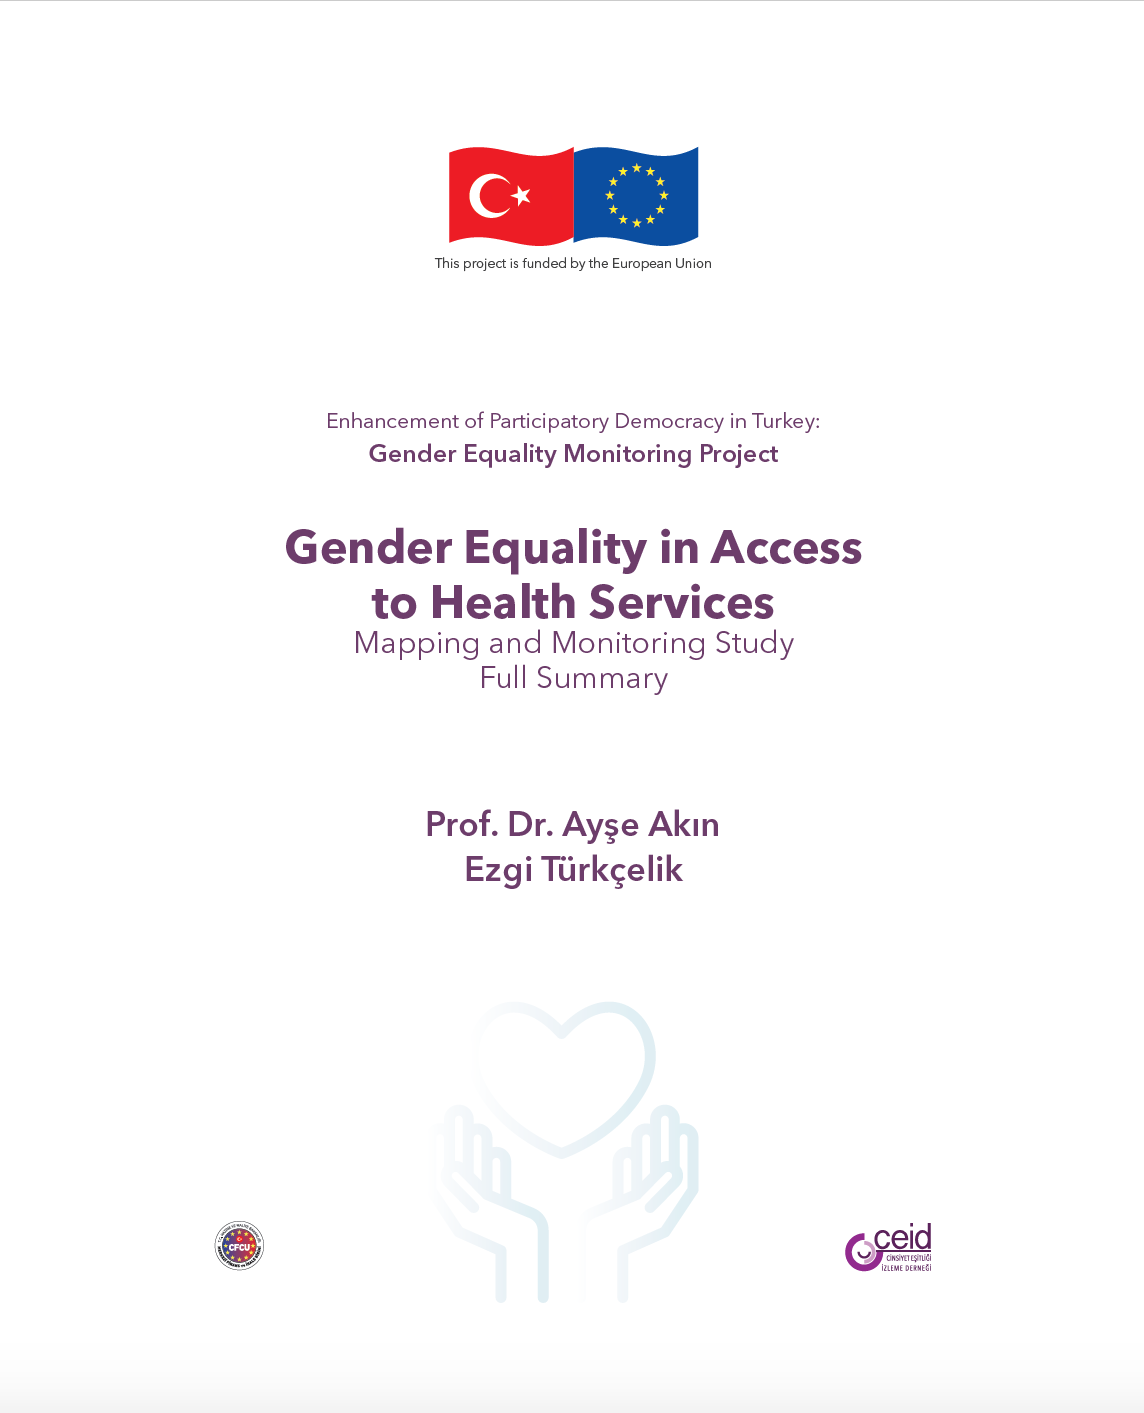 Gender Equality in Access to Health Services